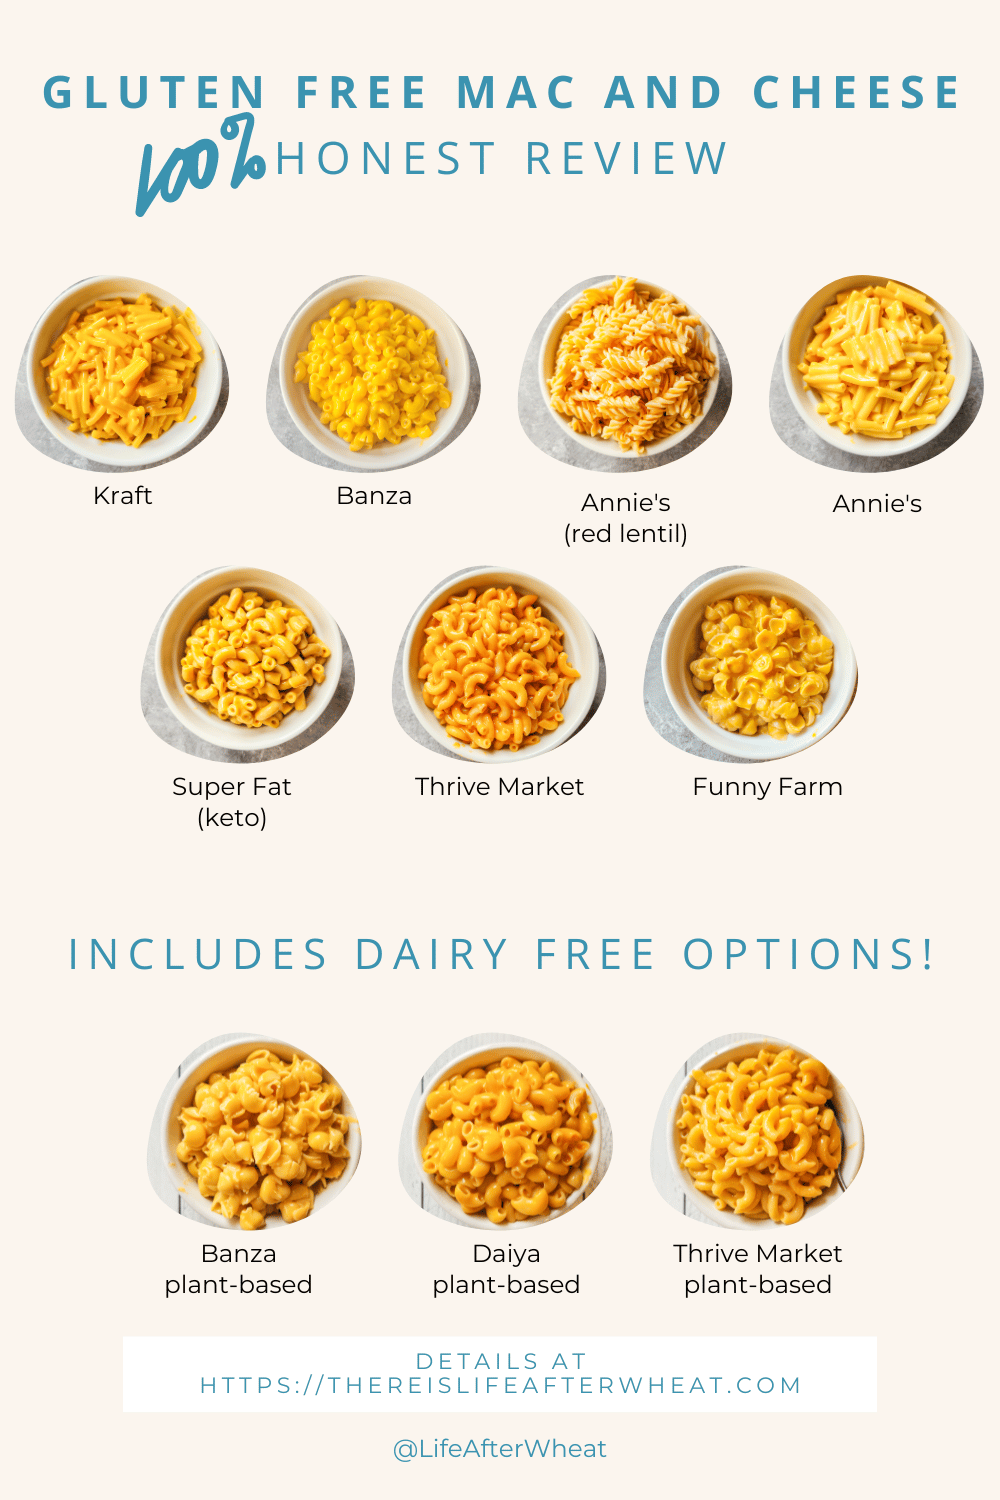 https://thereislifeafterwheat.com/wp-content/uploads/2023/05/Gluten-Free-Mac-and-Cheese-Graphic.png